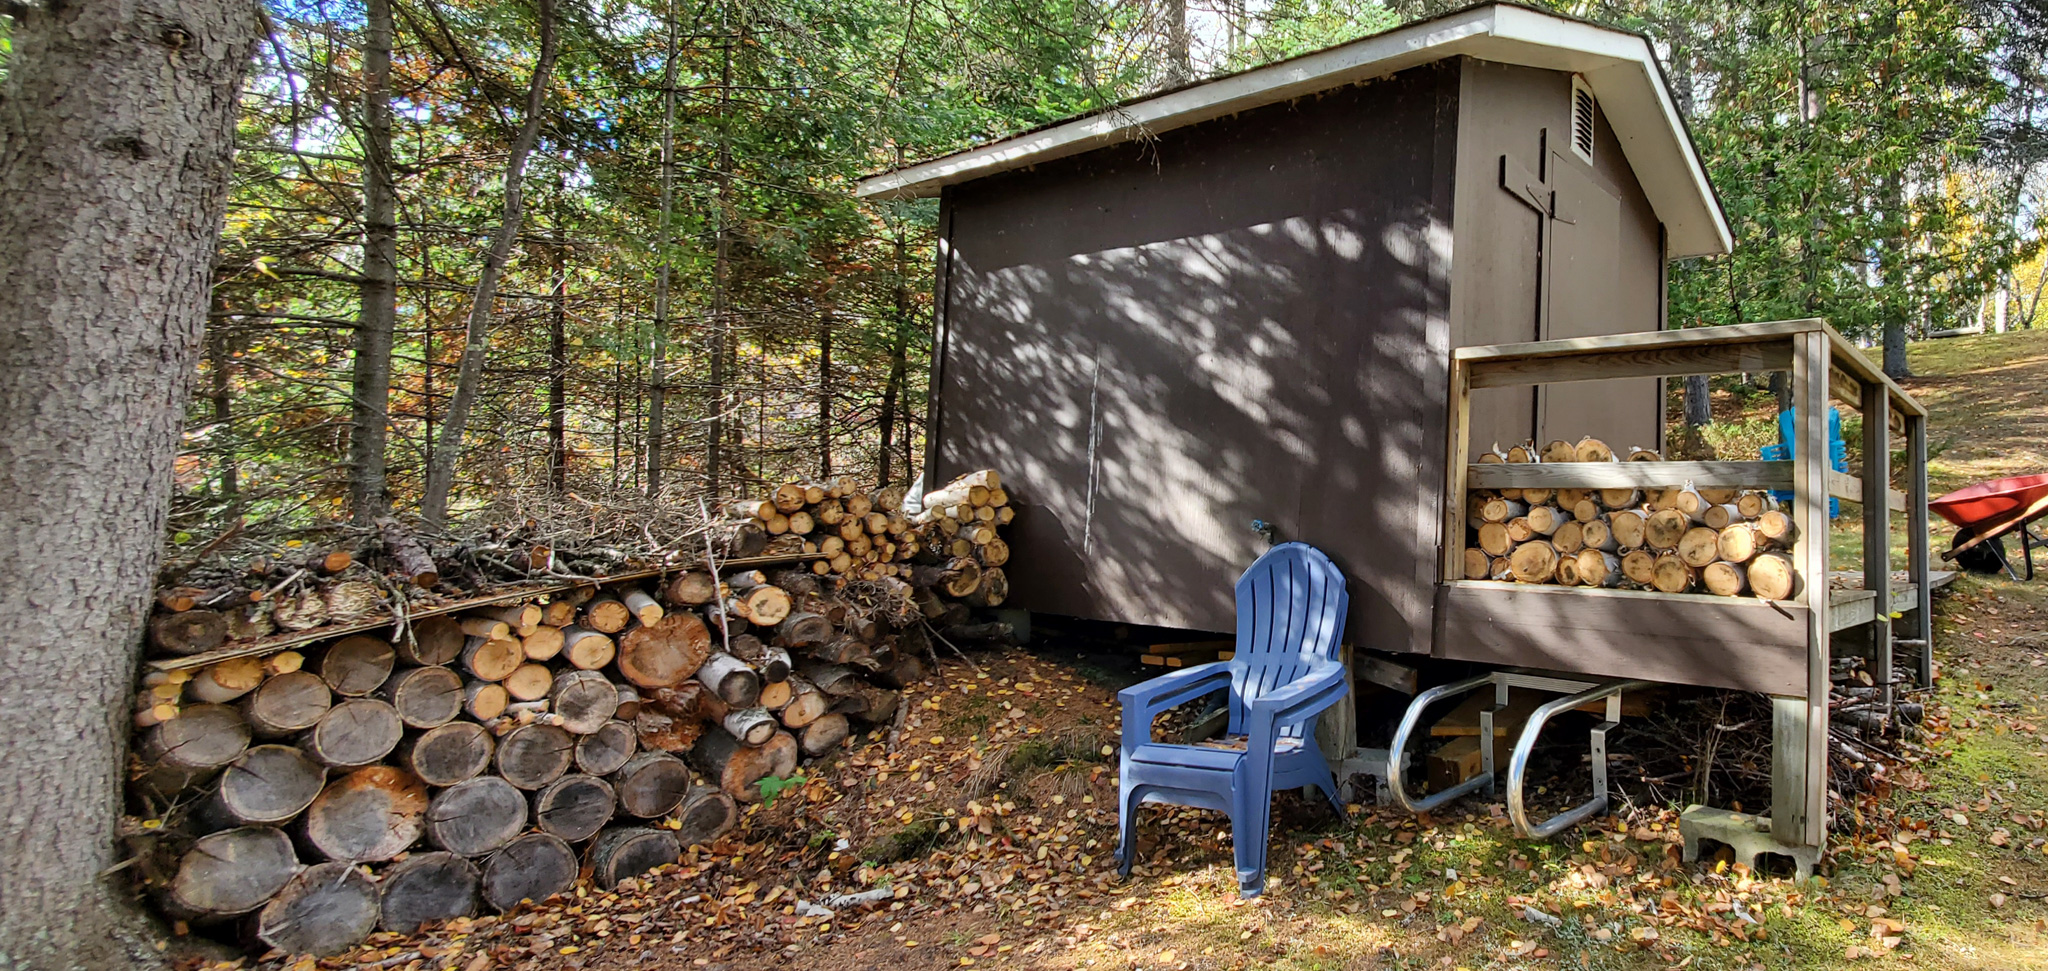 A small storage shed. A pile of fire wood and a blue Muskoka chair sit beside the shed.